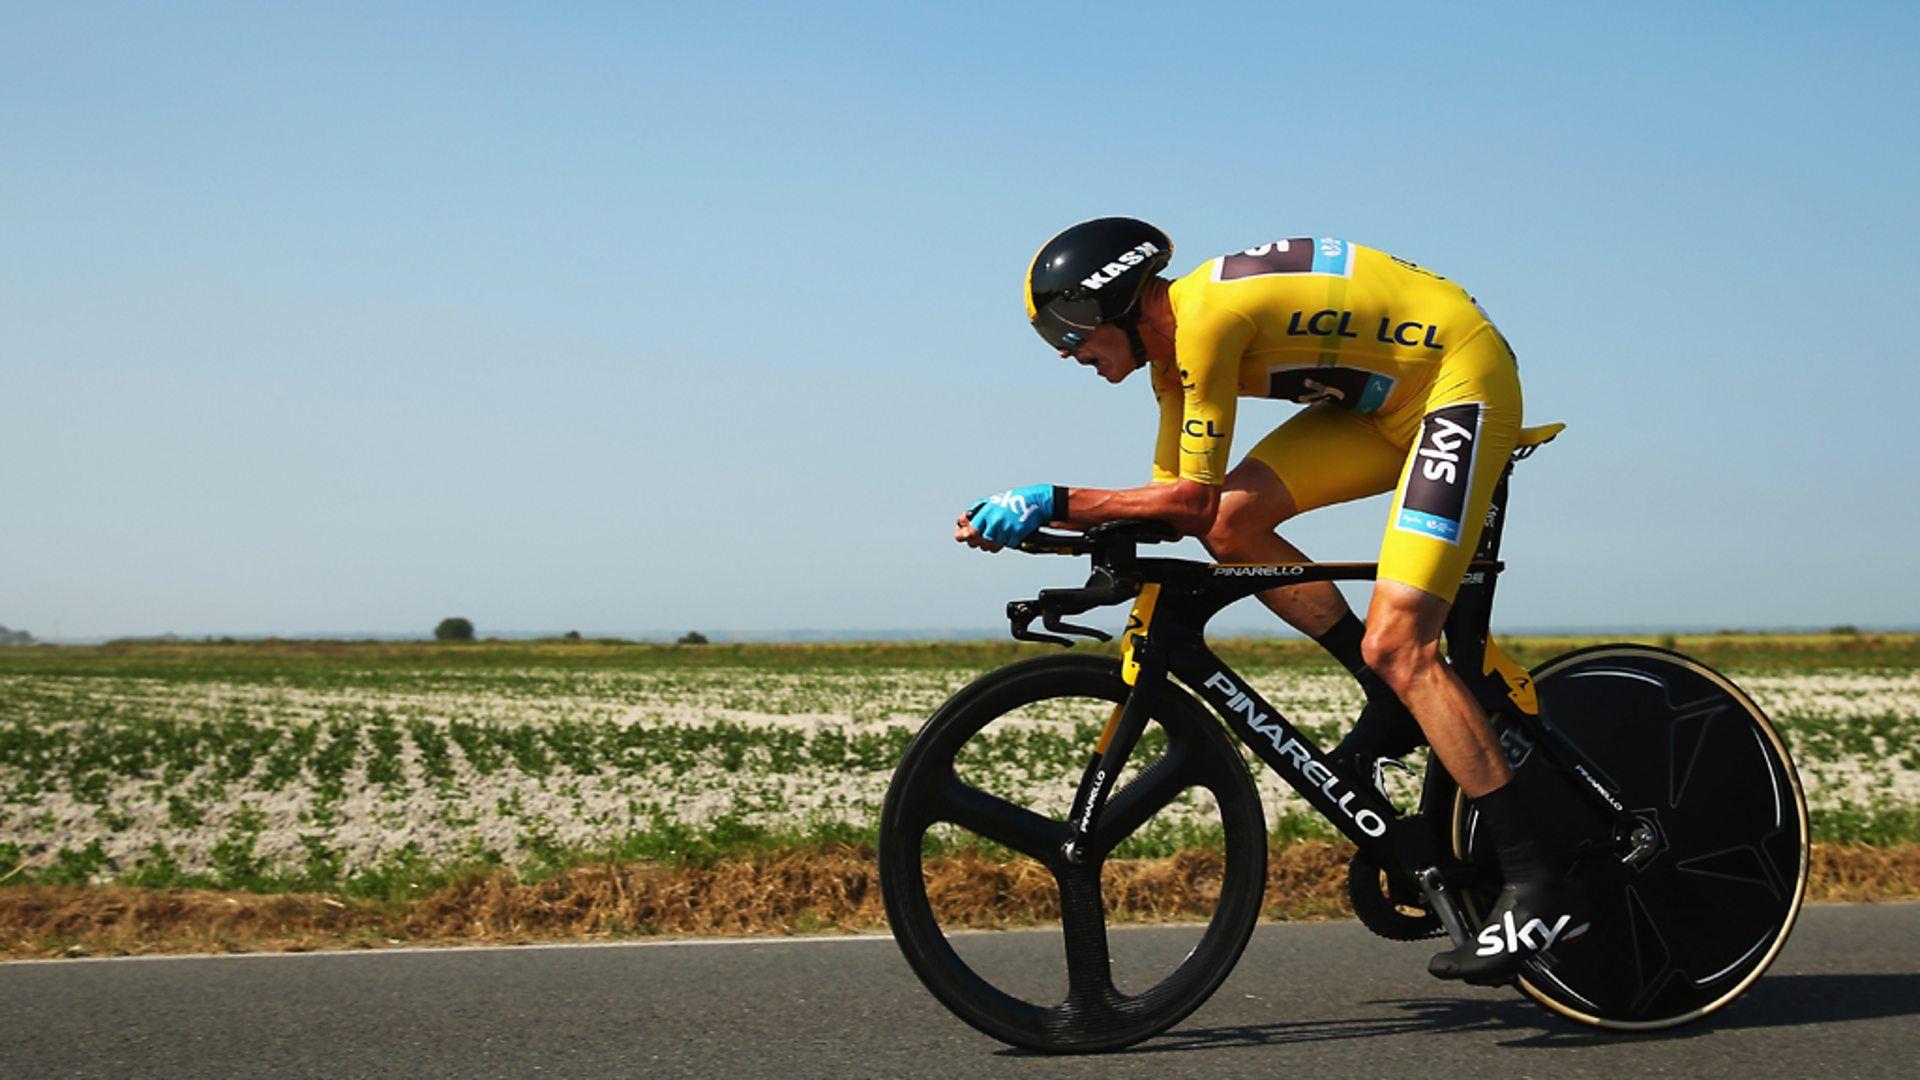 BBC World Service or Less, Analysing Chris Froome's Tour de